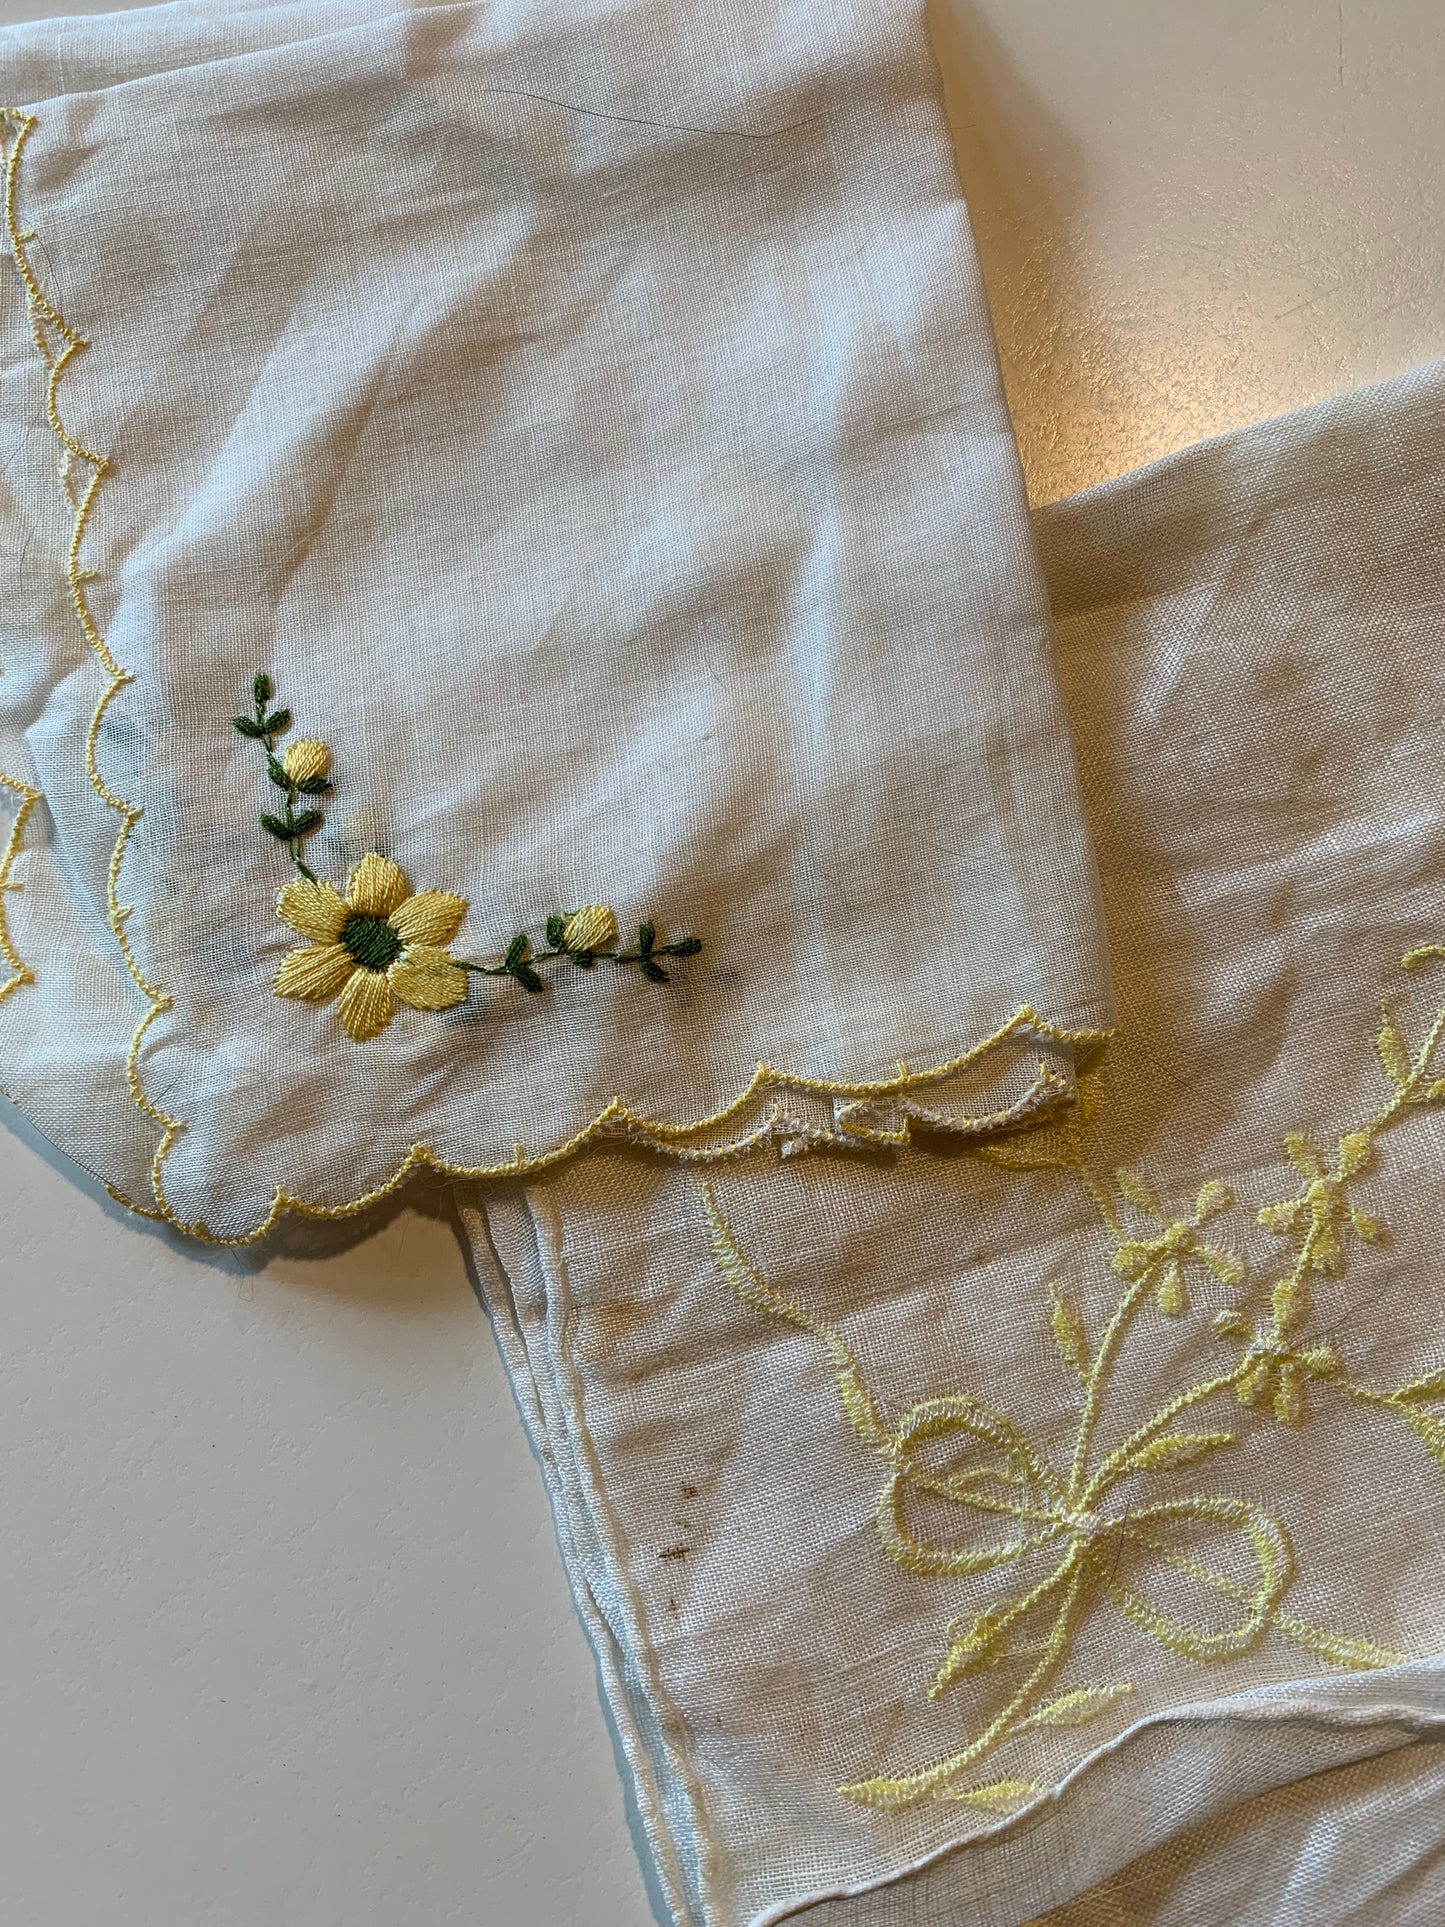 Lot 2 White and Yellow Embroidered Handkerchiefs circa 1940s